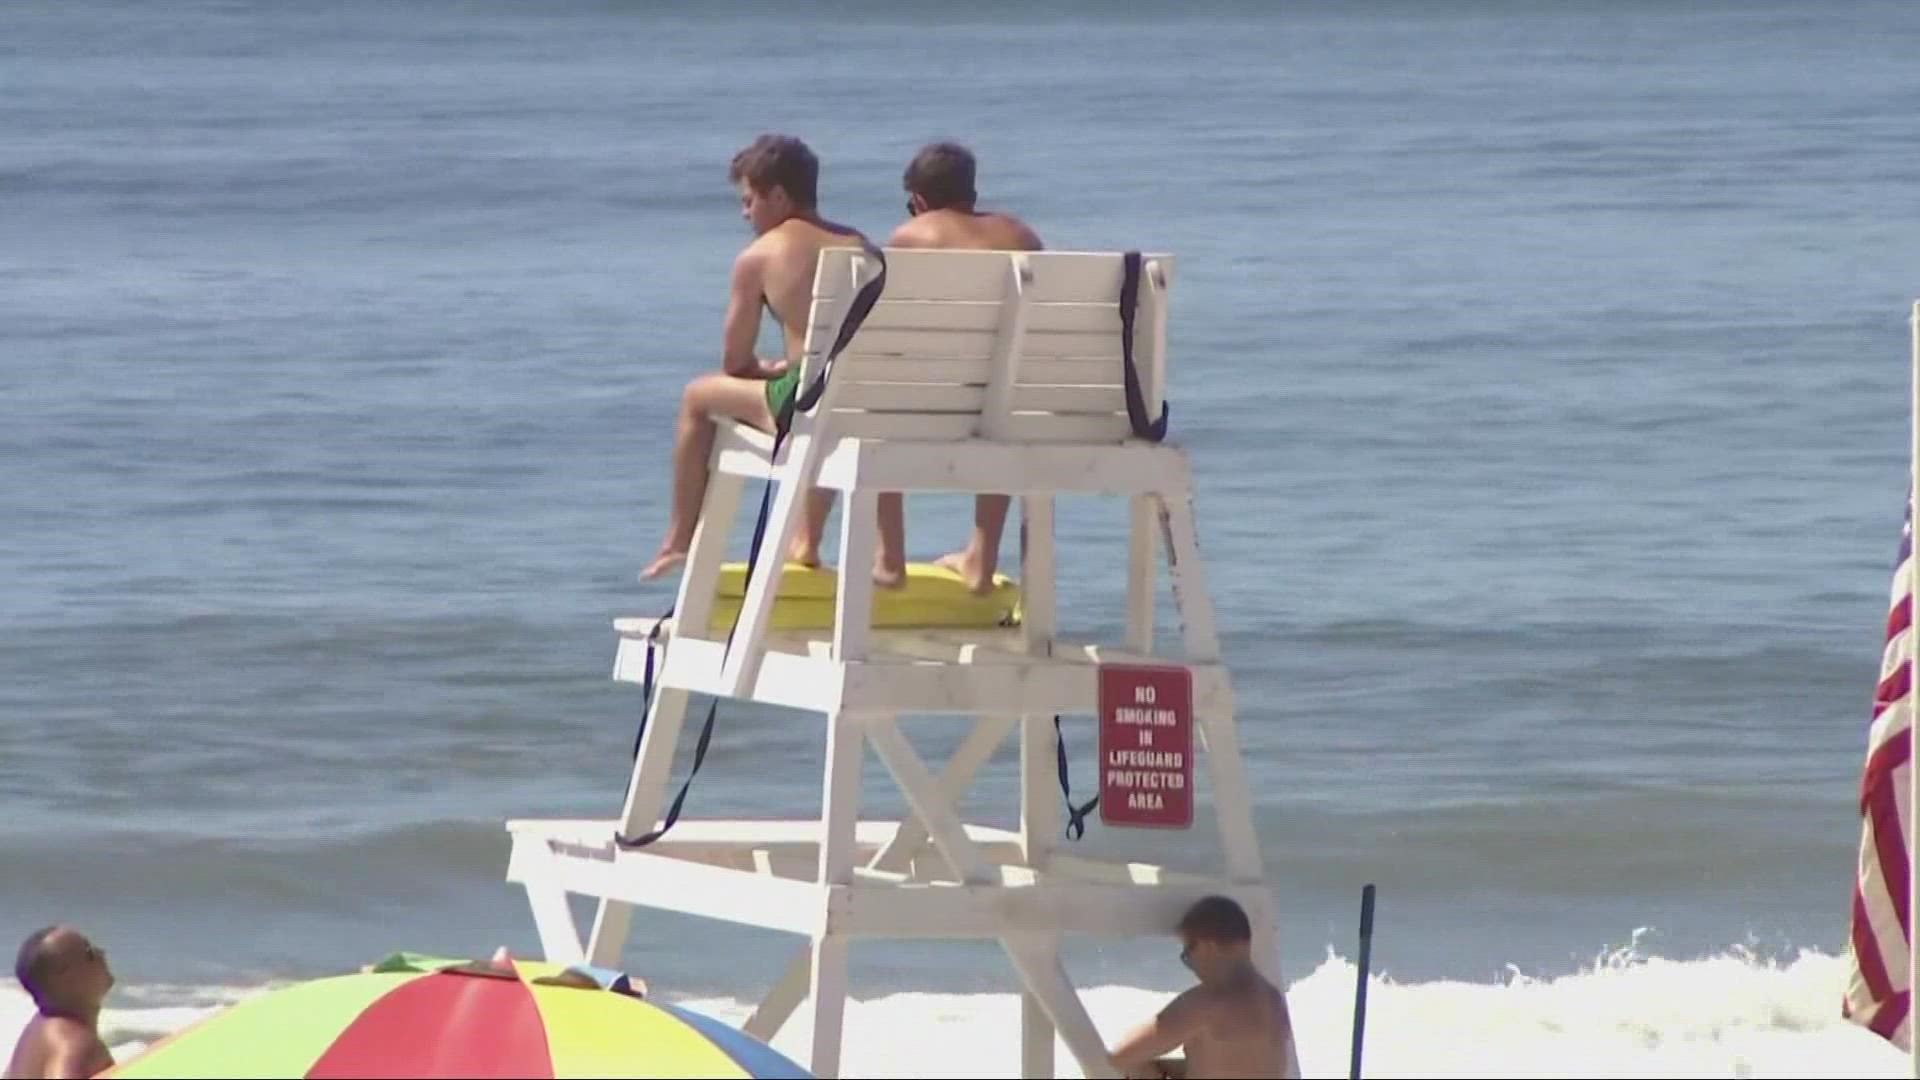 The lifeguard, who was acting out the role of a victim, was bit on the chest and hand.